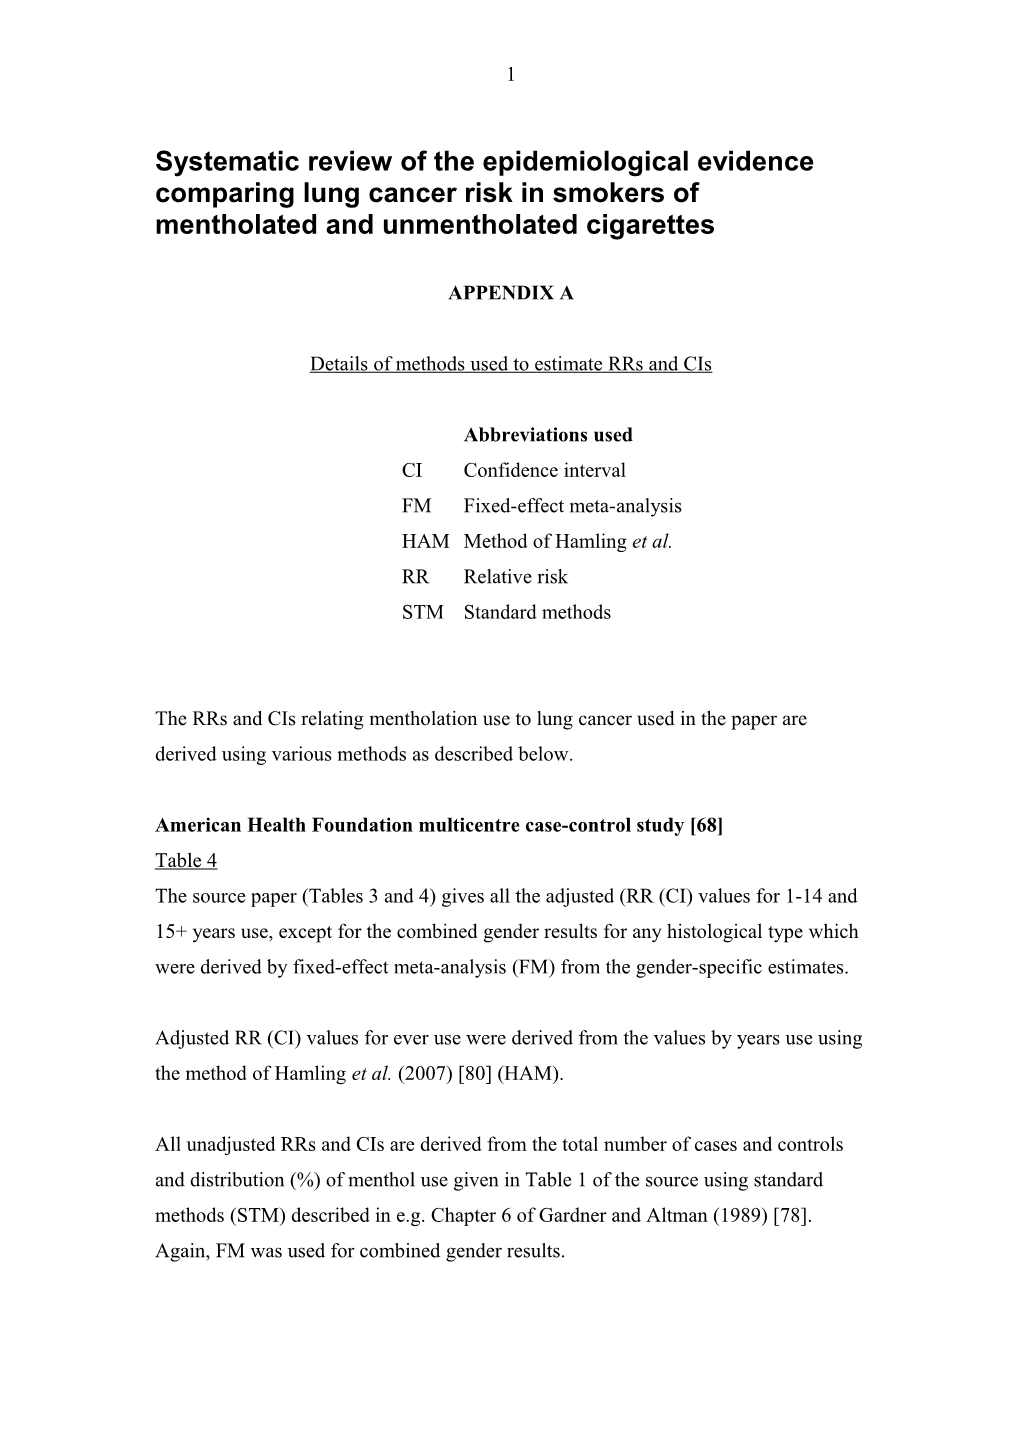 Systematic Review of the Epidemiological Evidence Relating Cigarette Mentholation to Risk